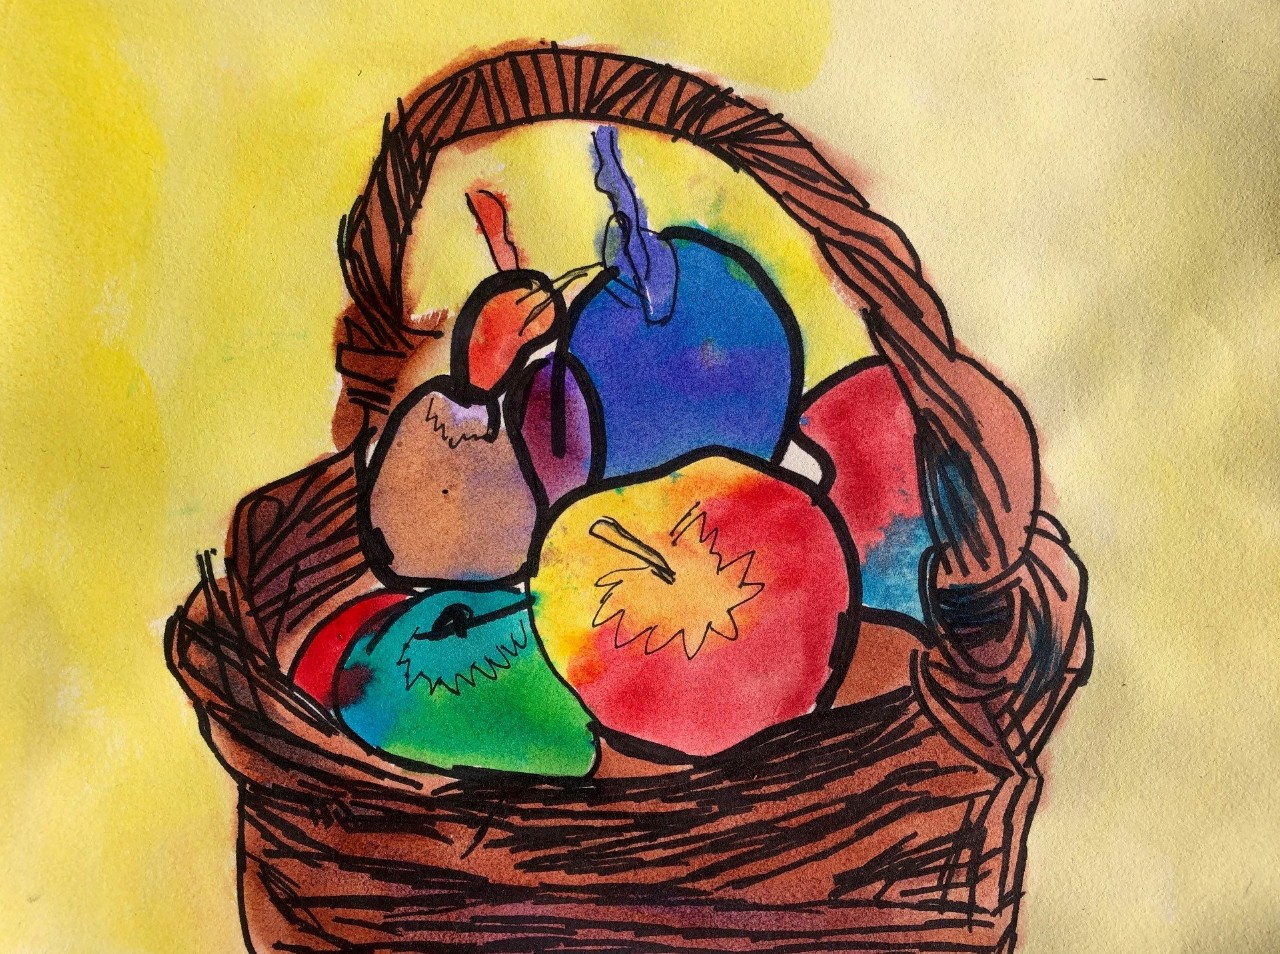 a watercolor painting and sketch in pen of a brown basket holding an assortment of colorful fruit